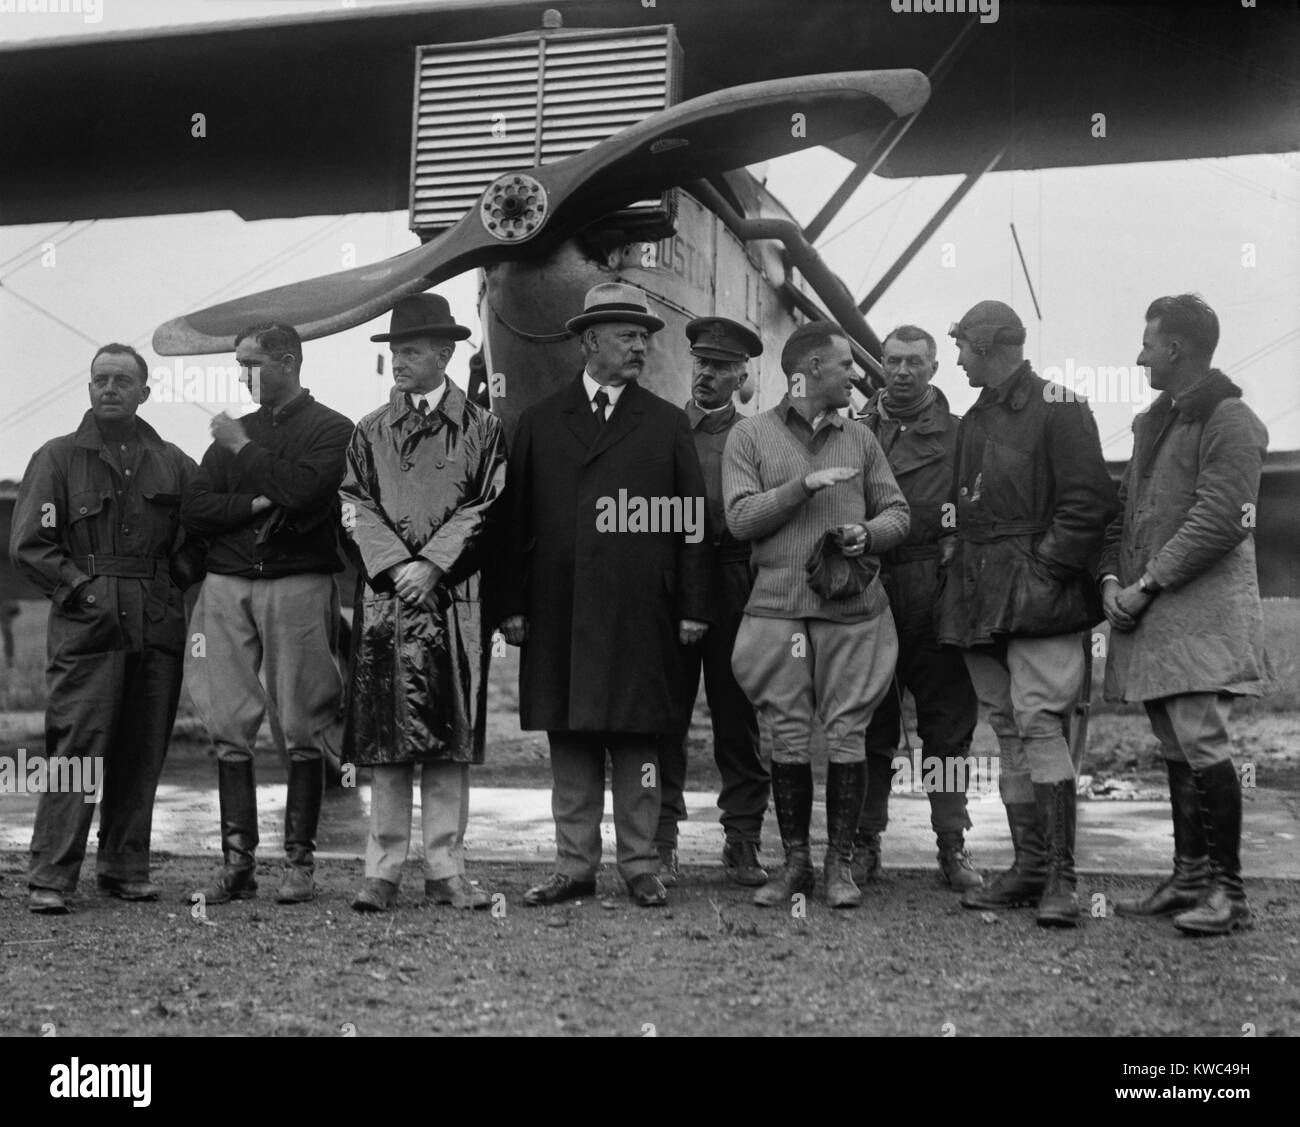 President Calvin Coolidge with aviators of the first-around-the-world airplane flight. Sept 9, 1924. In front of the Douglas World Cruisers 'Boston II', Coolidge is flanked by Lt. Lowell H. Smith and Navy Sec. Weeks. In uniform behind the aviators are Gen. Mason Patrick and Gen. Billy Mitchell. (BSLOC 2015 15 140) Stock Photo